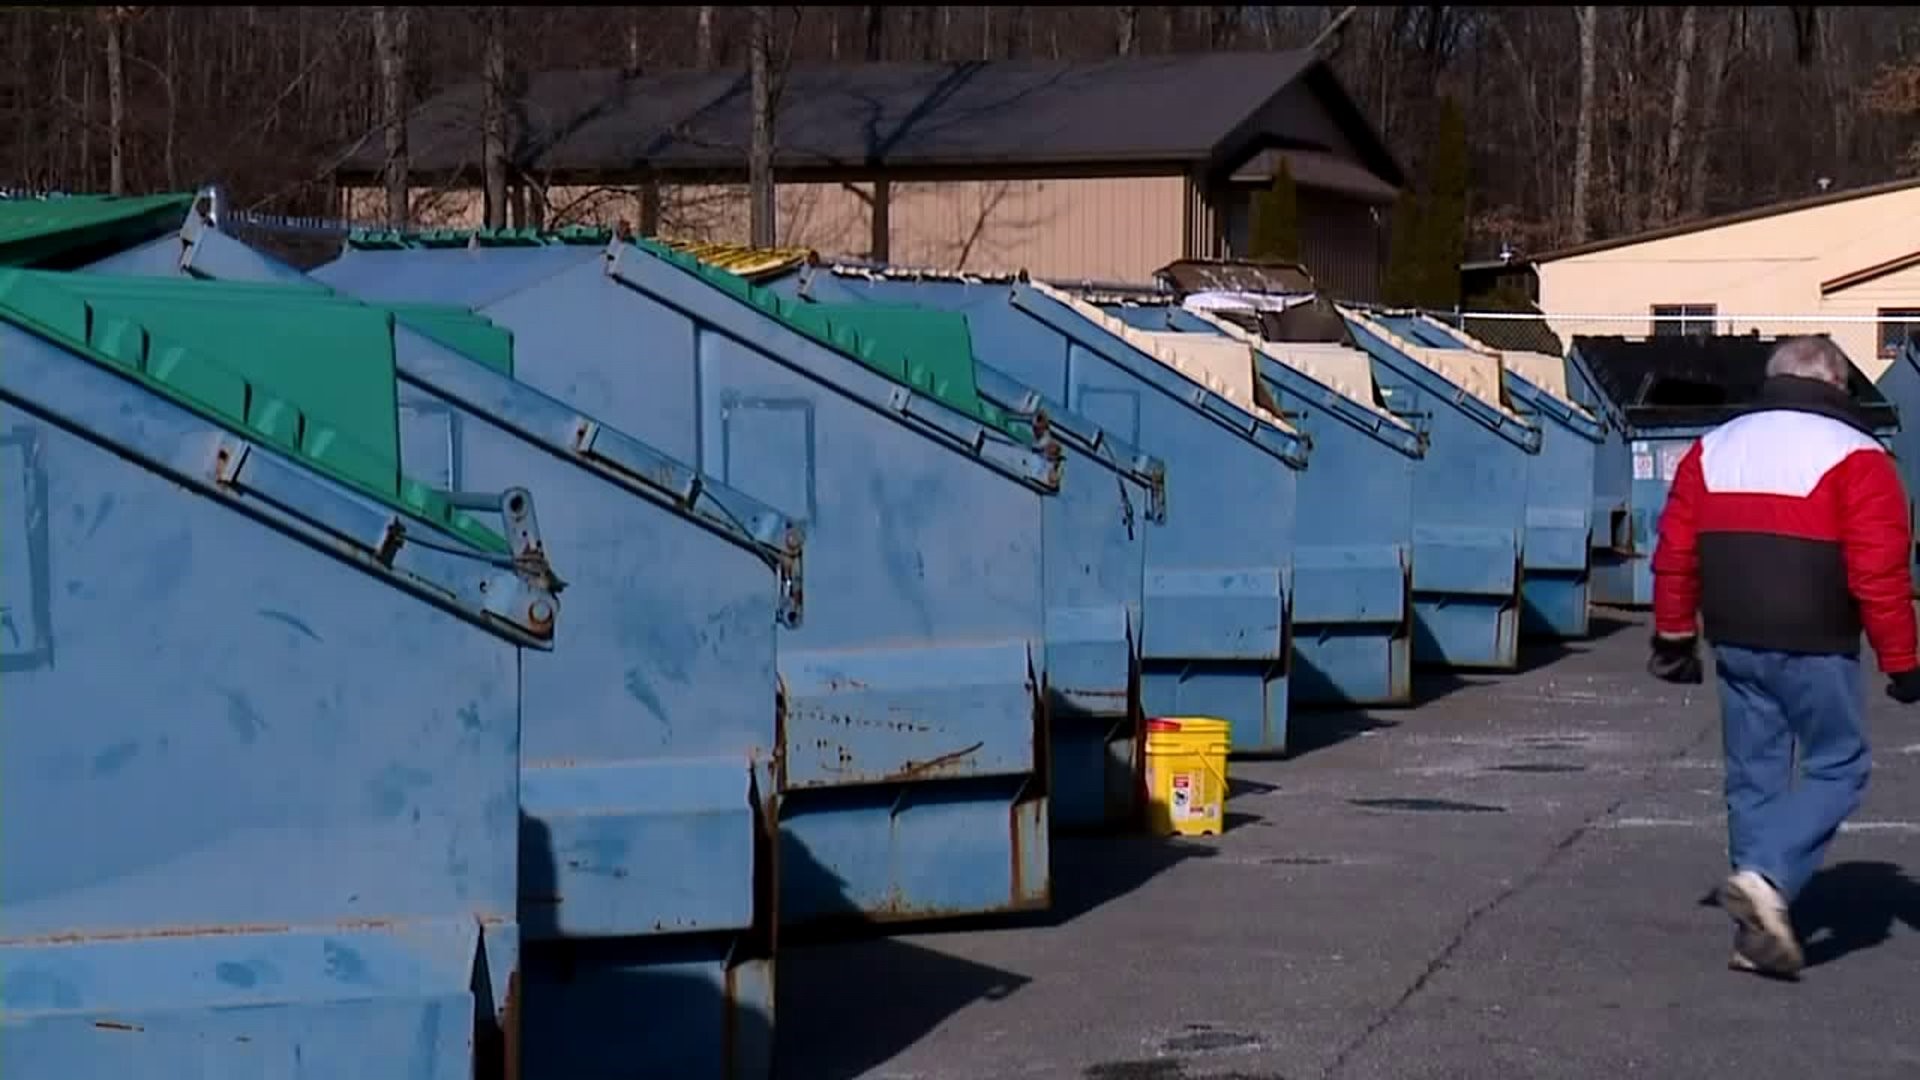 Gates, Patrols Cut Down on Illegal Dumping at Monroe County Recycling Sites